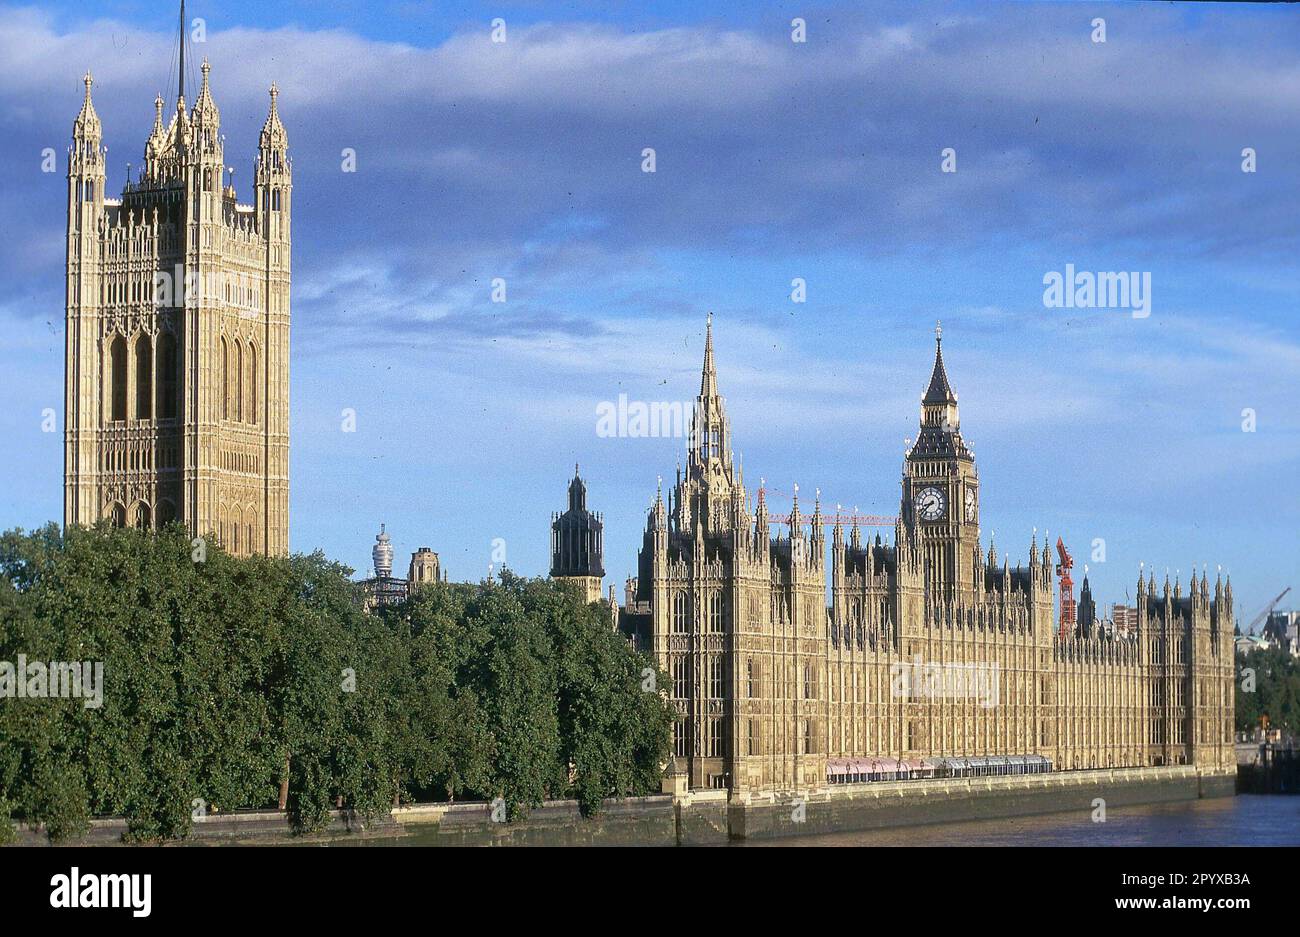 Photo date: 14.10.1996 The English Parliament with Big Ben in London. [automated translation] Stock Photo